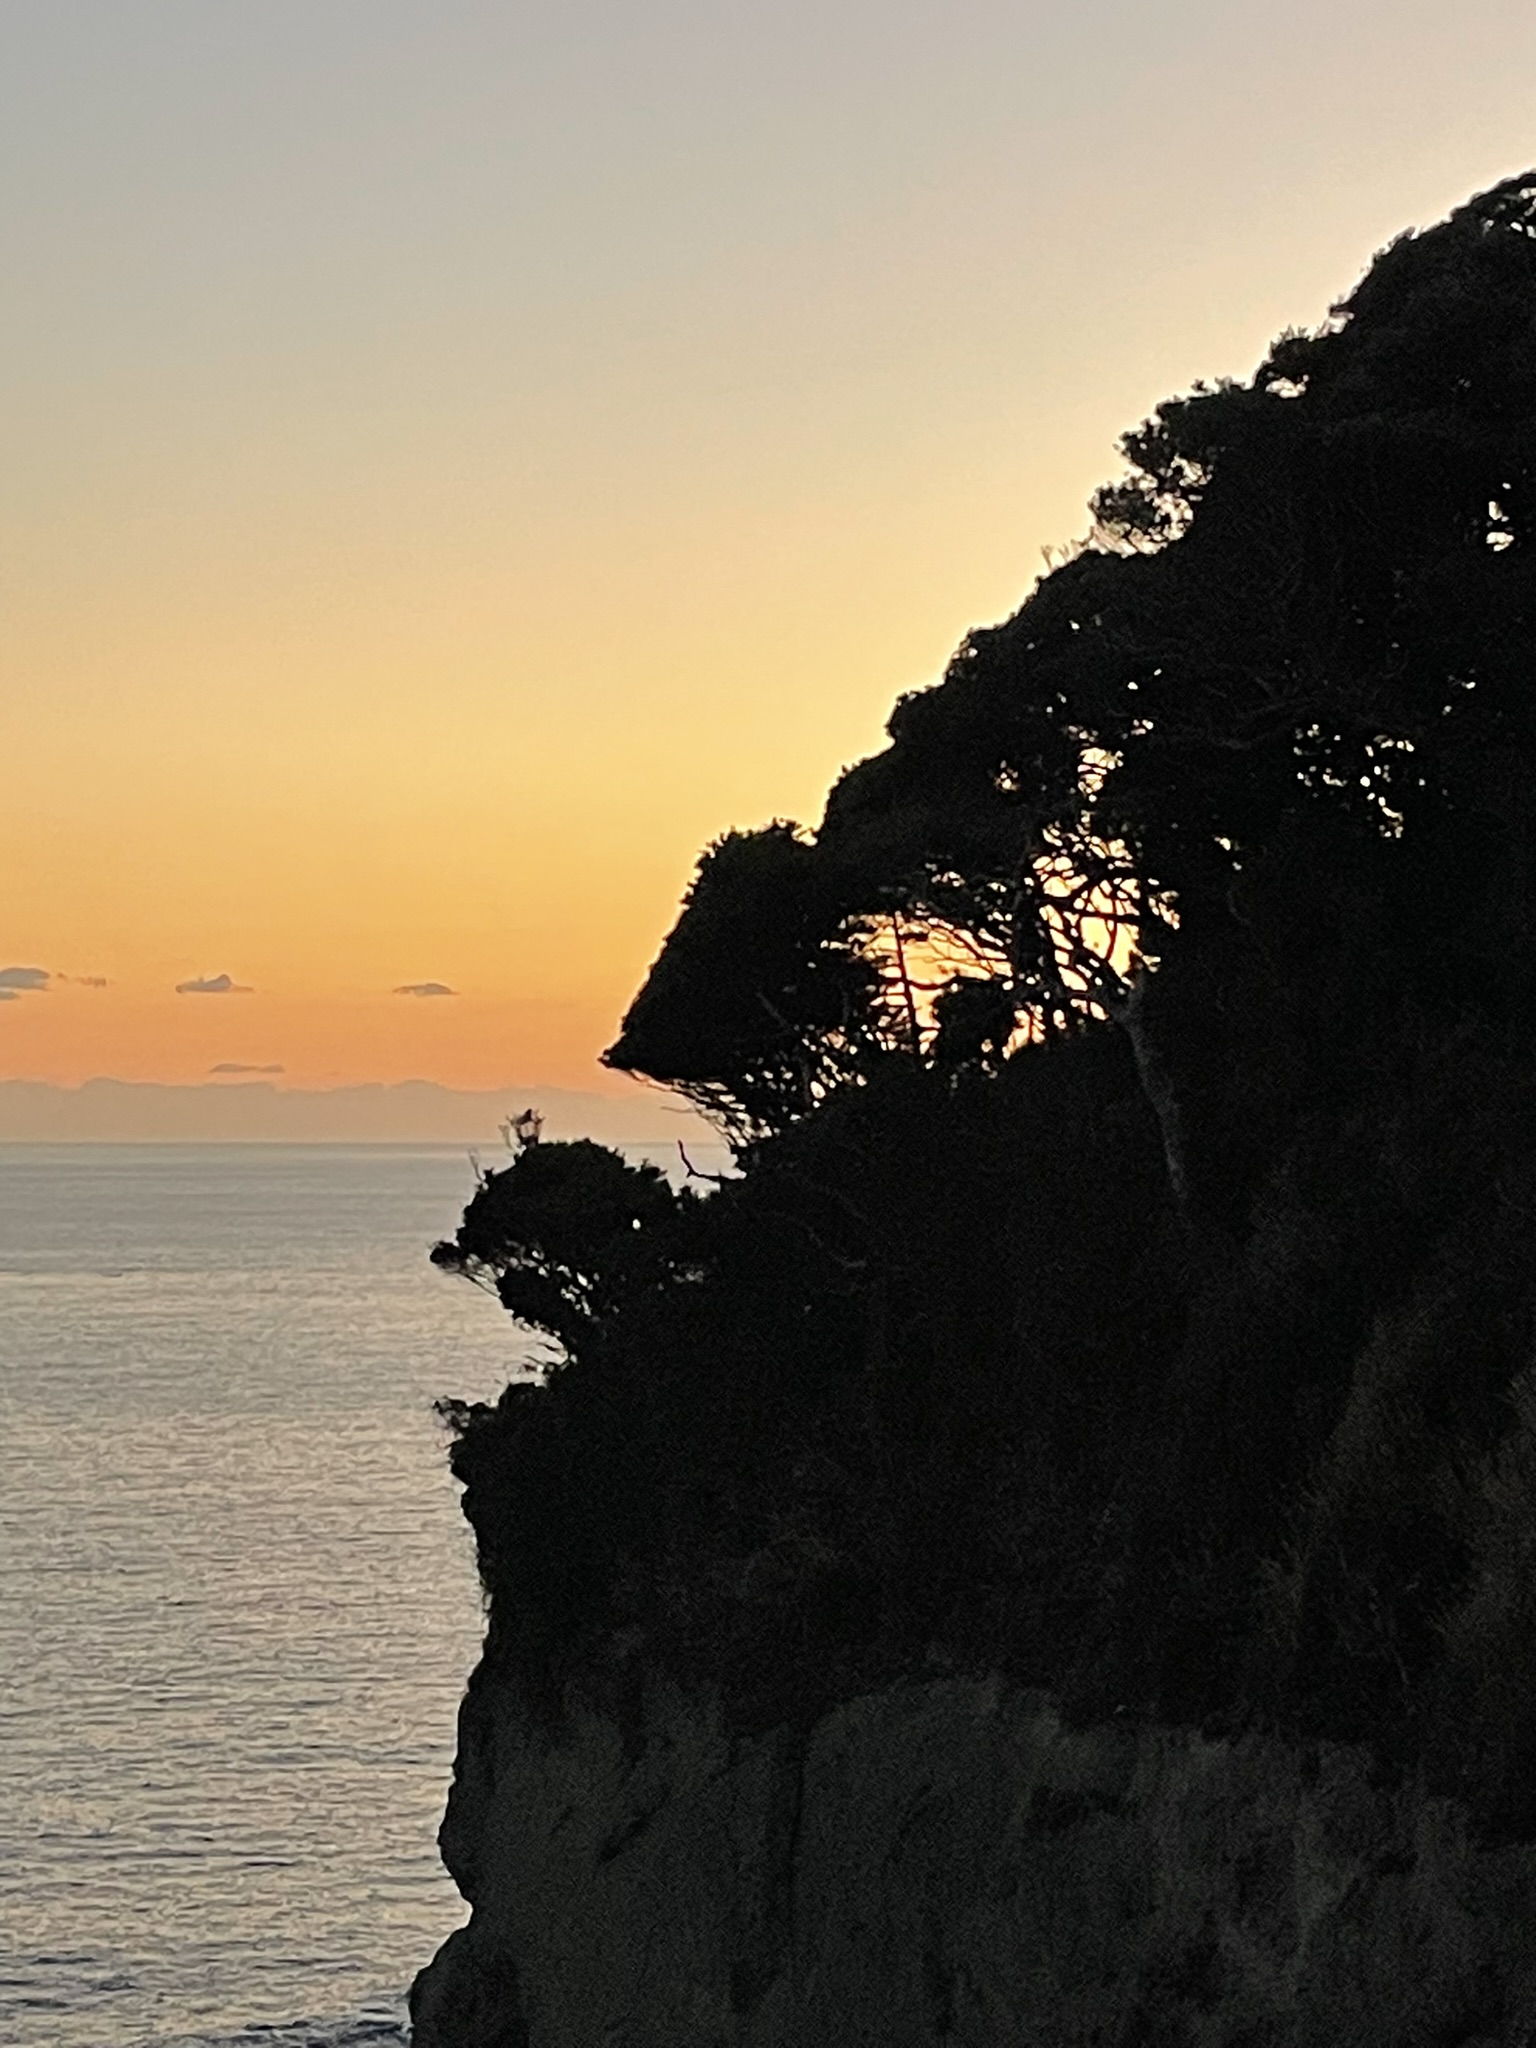 A cliff contrasted against the sunset sky